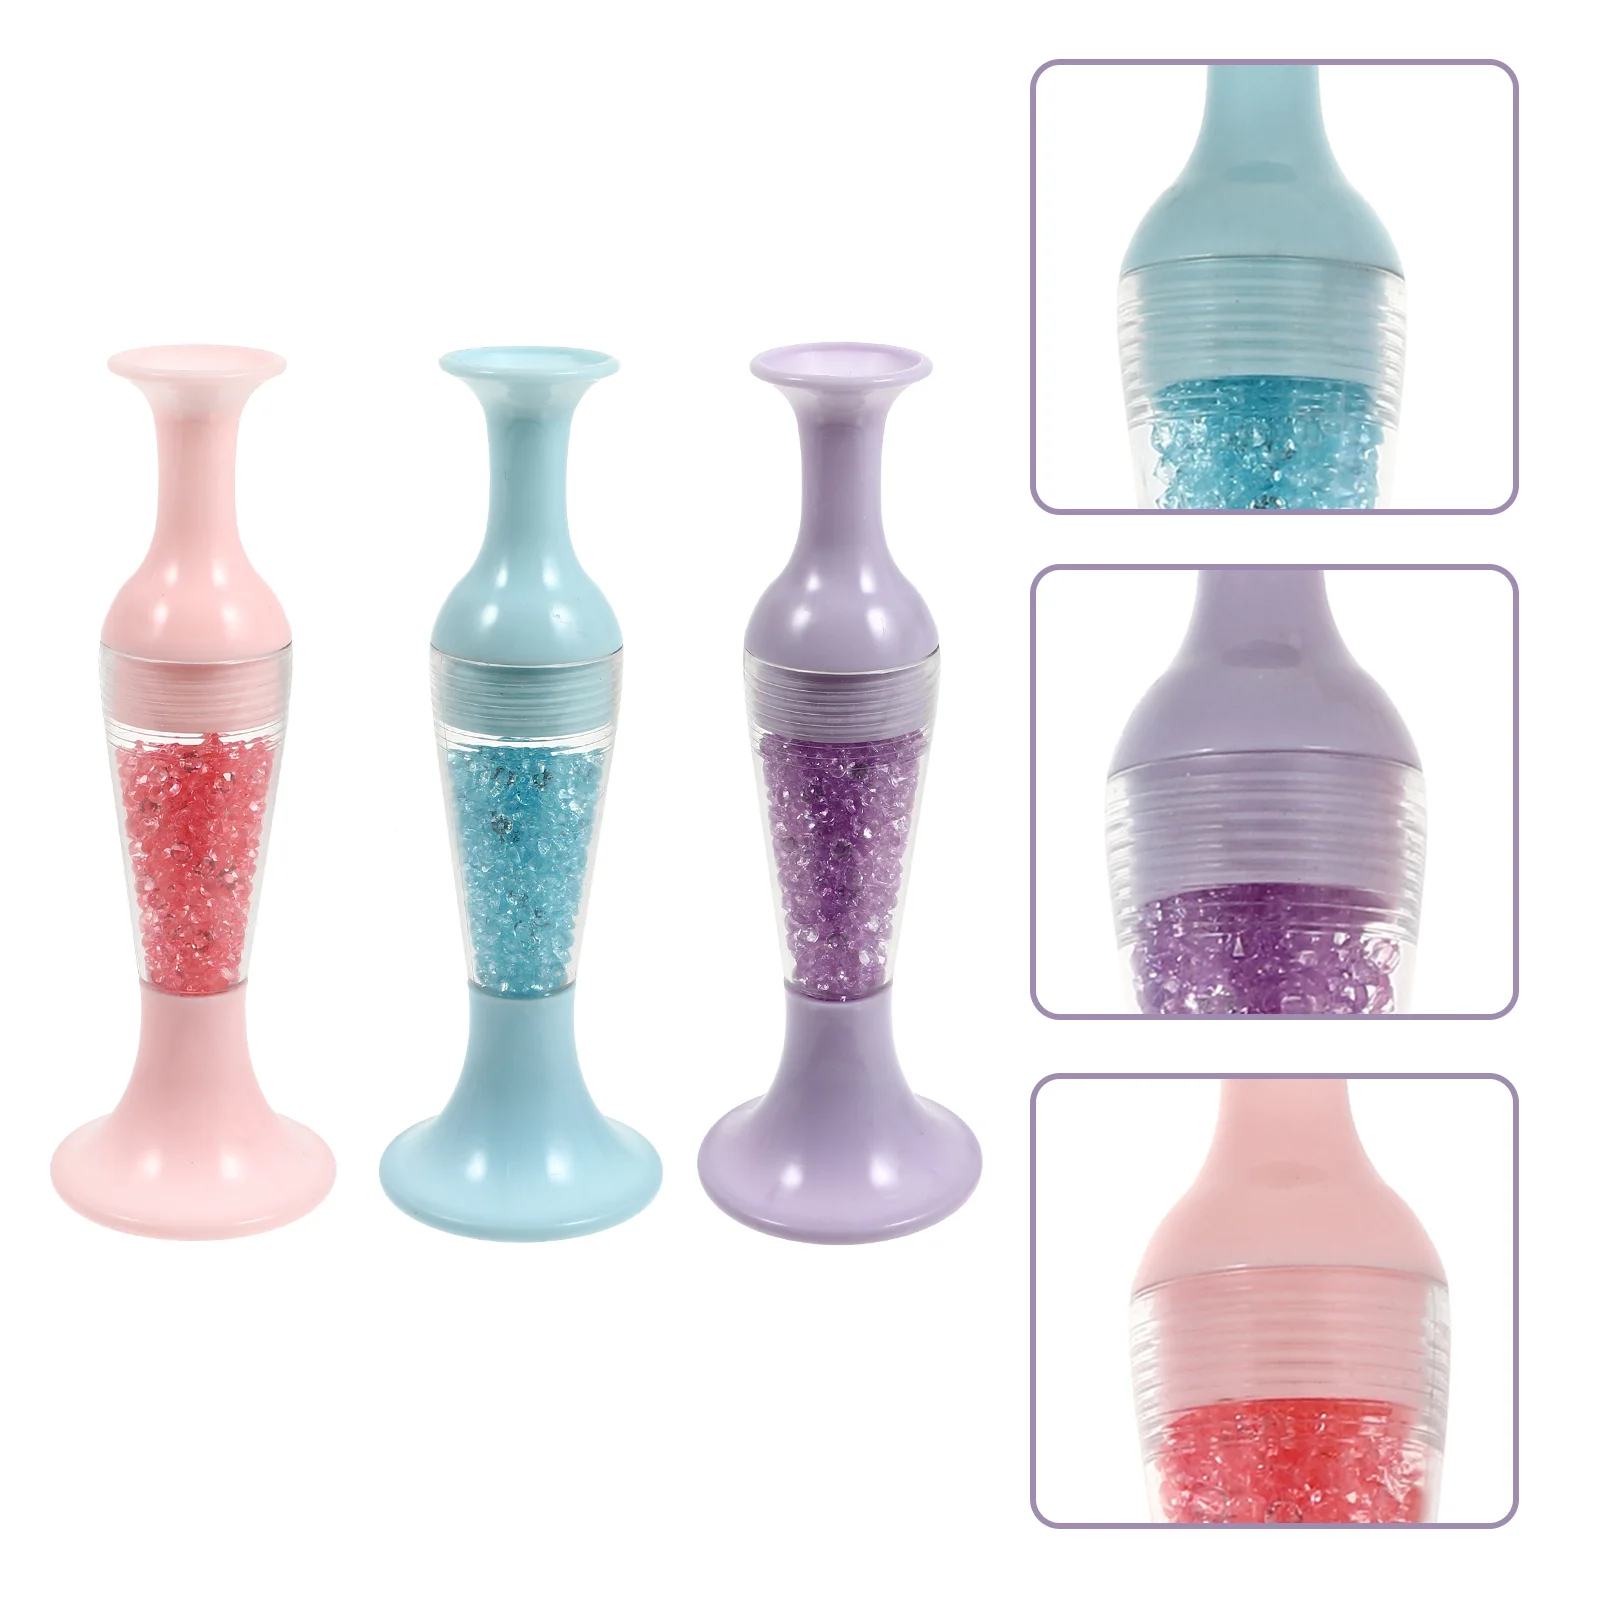 

Penart Rhinestone Drill Dotting Toolaccessories Picker 5D Pens Diy Tools Embroidery Picturebead Stones Wax Point Sticky Vase